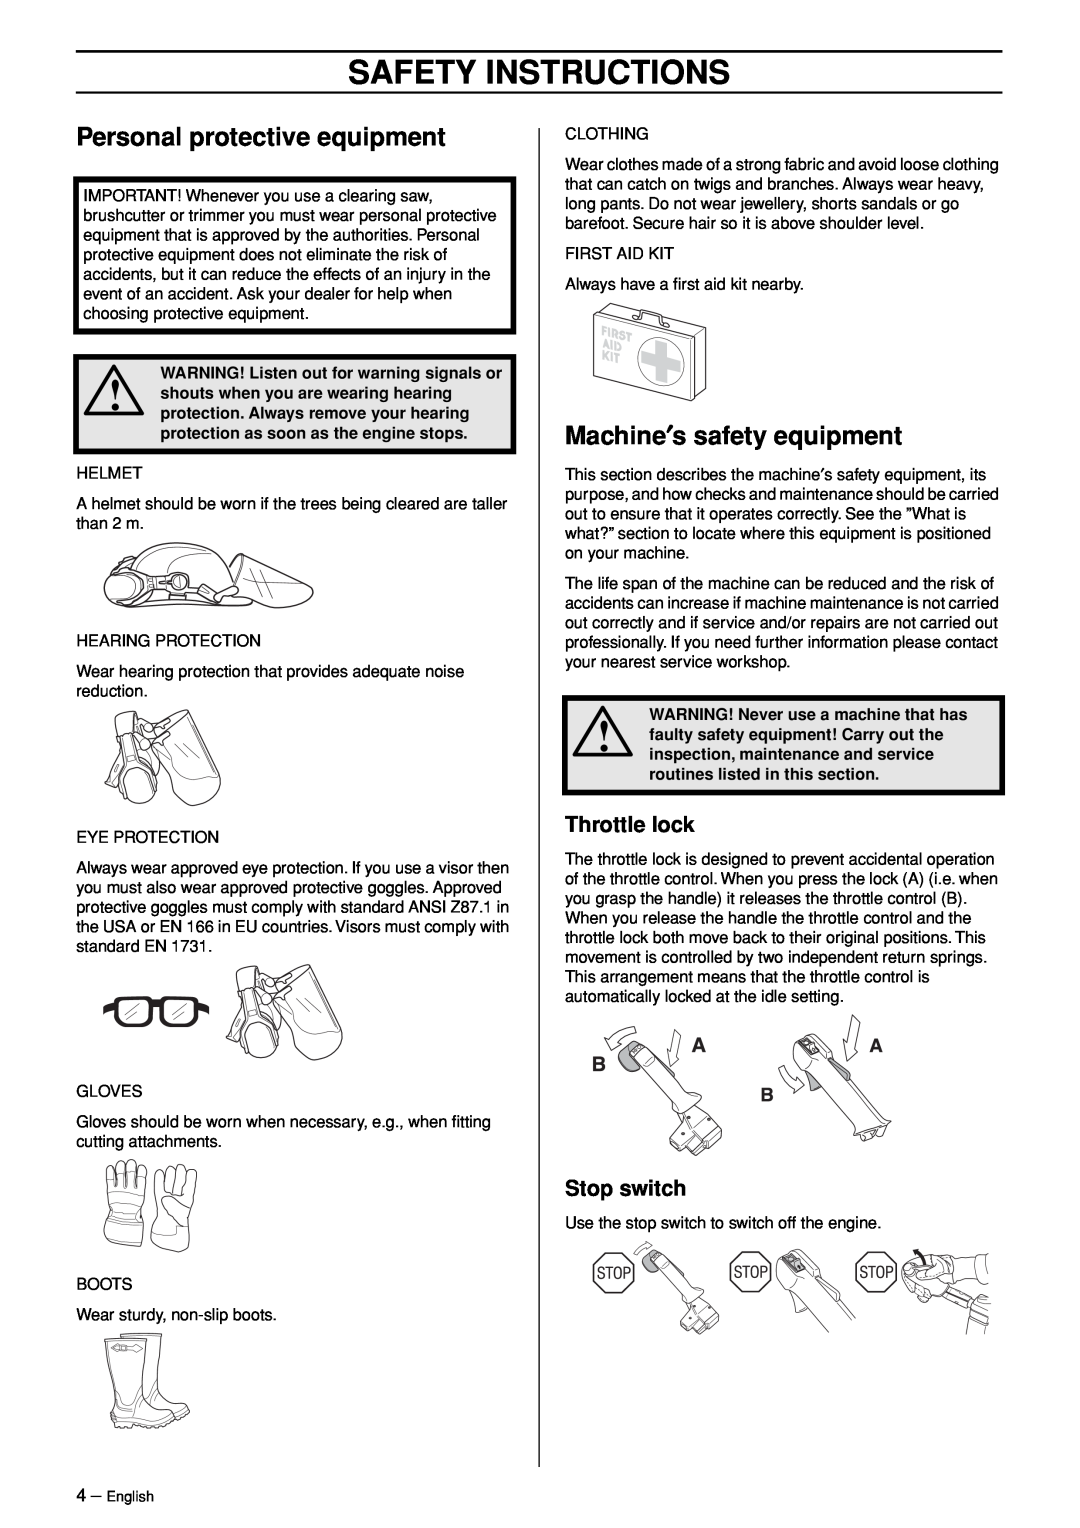 Husqvarna 245RX Safety Instructions, Personal protective equipment, Machine′s safety equipment, Throttle lock, Stop switch 